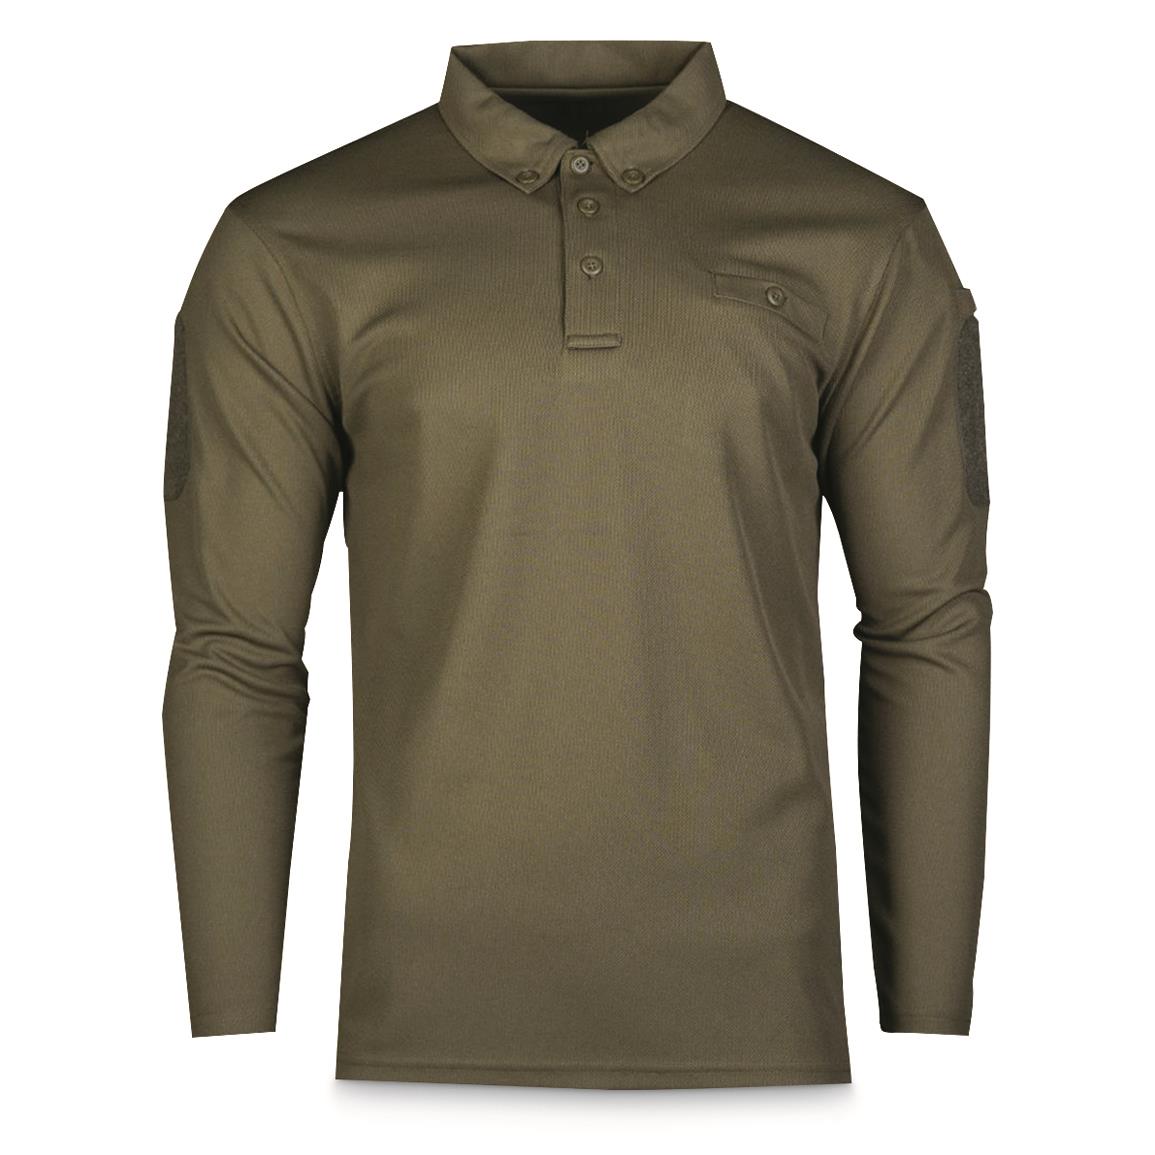 Mil-Tec Quick Dry Tactical Long Sleeve Polo Shirt, Olive Drab